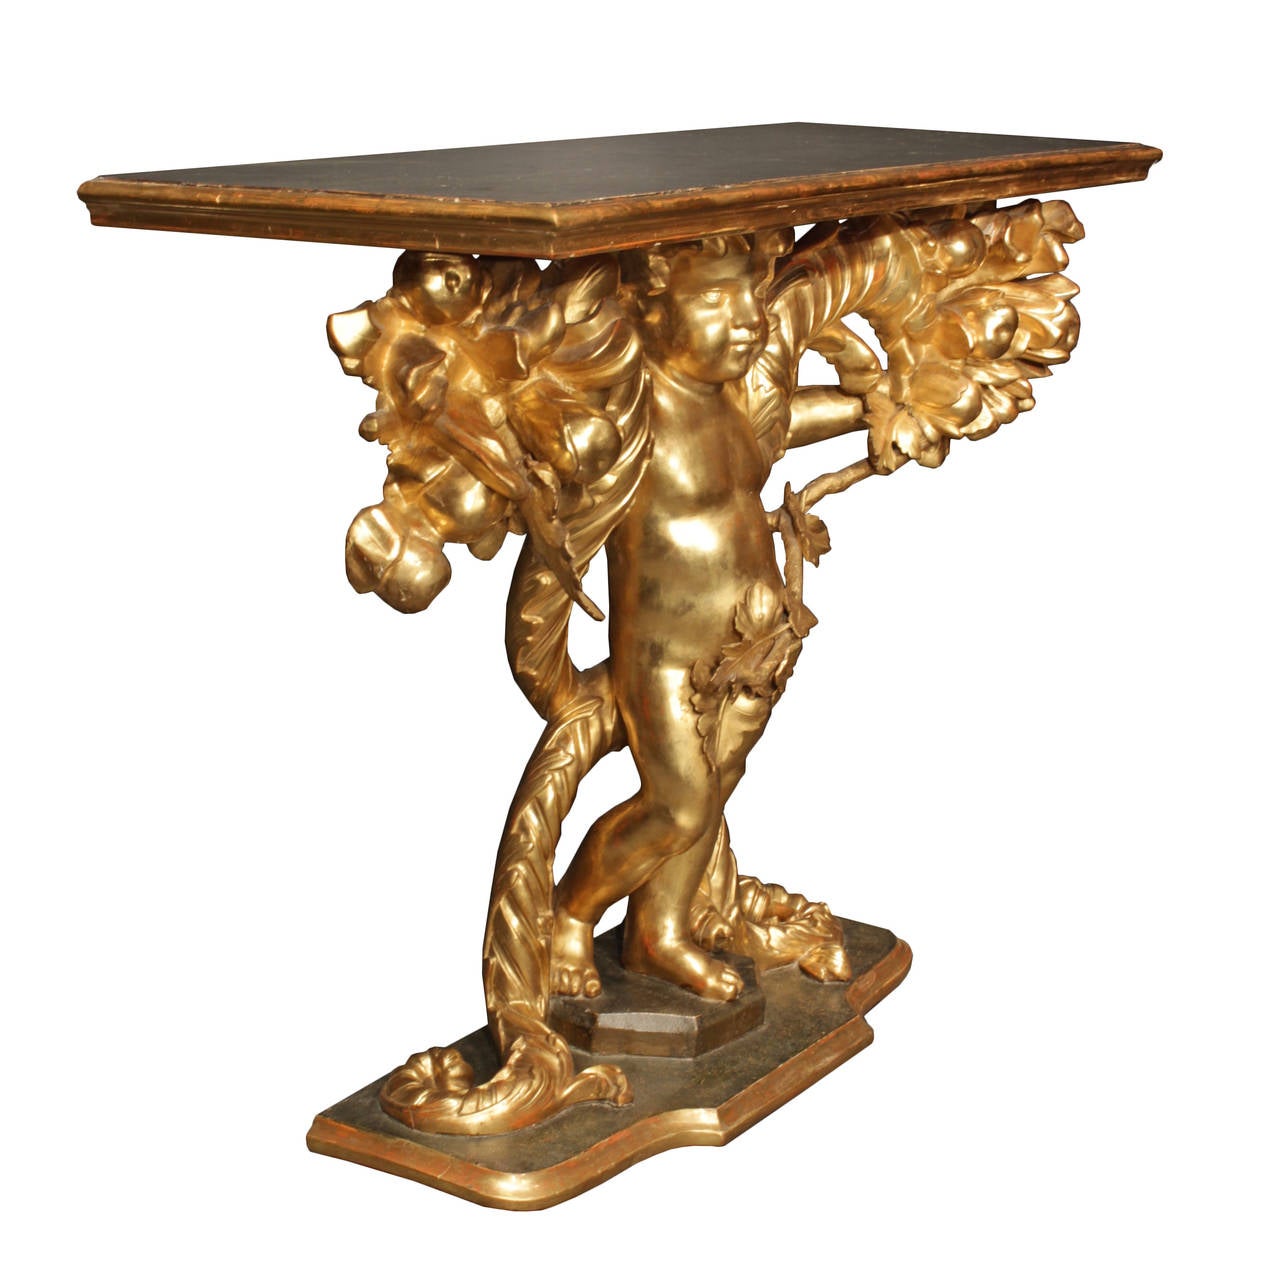 A stunning Italian late 18th century giltwood console from Tuscany. This freestanding console is raised on a mottled giltwood edge support and octagonal base with a simulated patinated bronze finish. A finely carved giltwood cherub holds up two